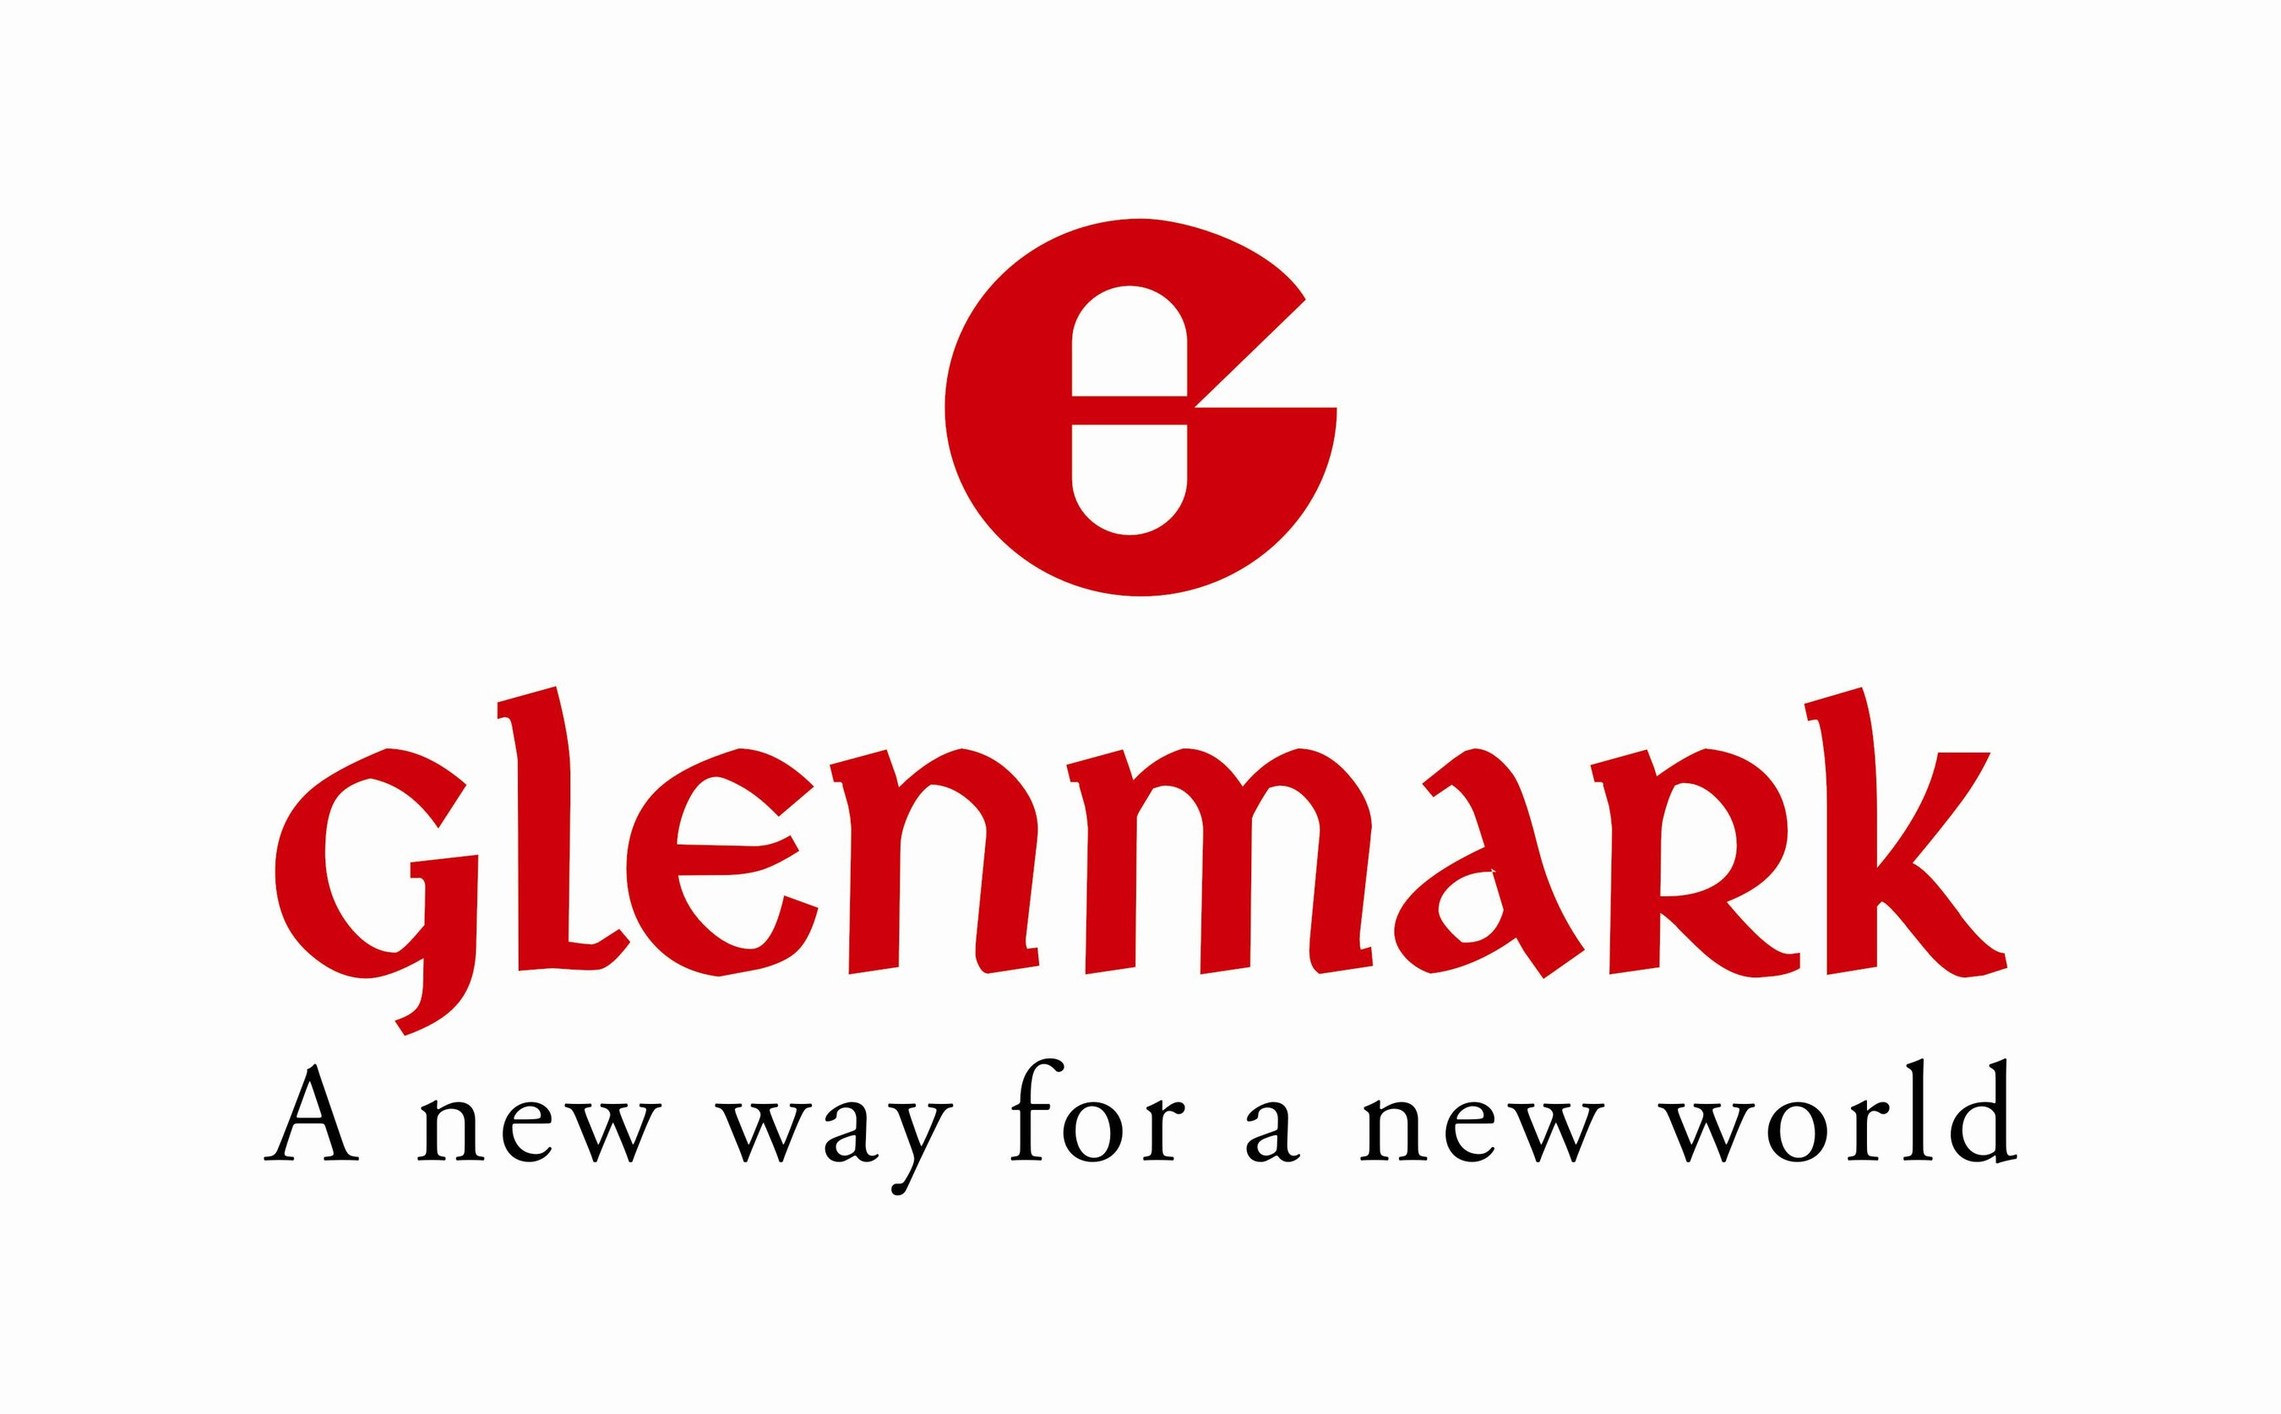 glenmark pharma reports revenue of inr 27,773 mn and pat of inr 2,111 mn for q1 fy 2022-23